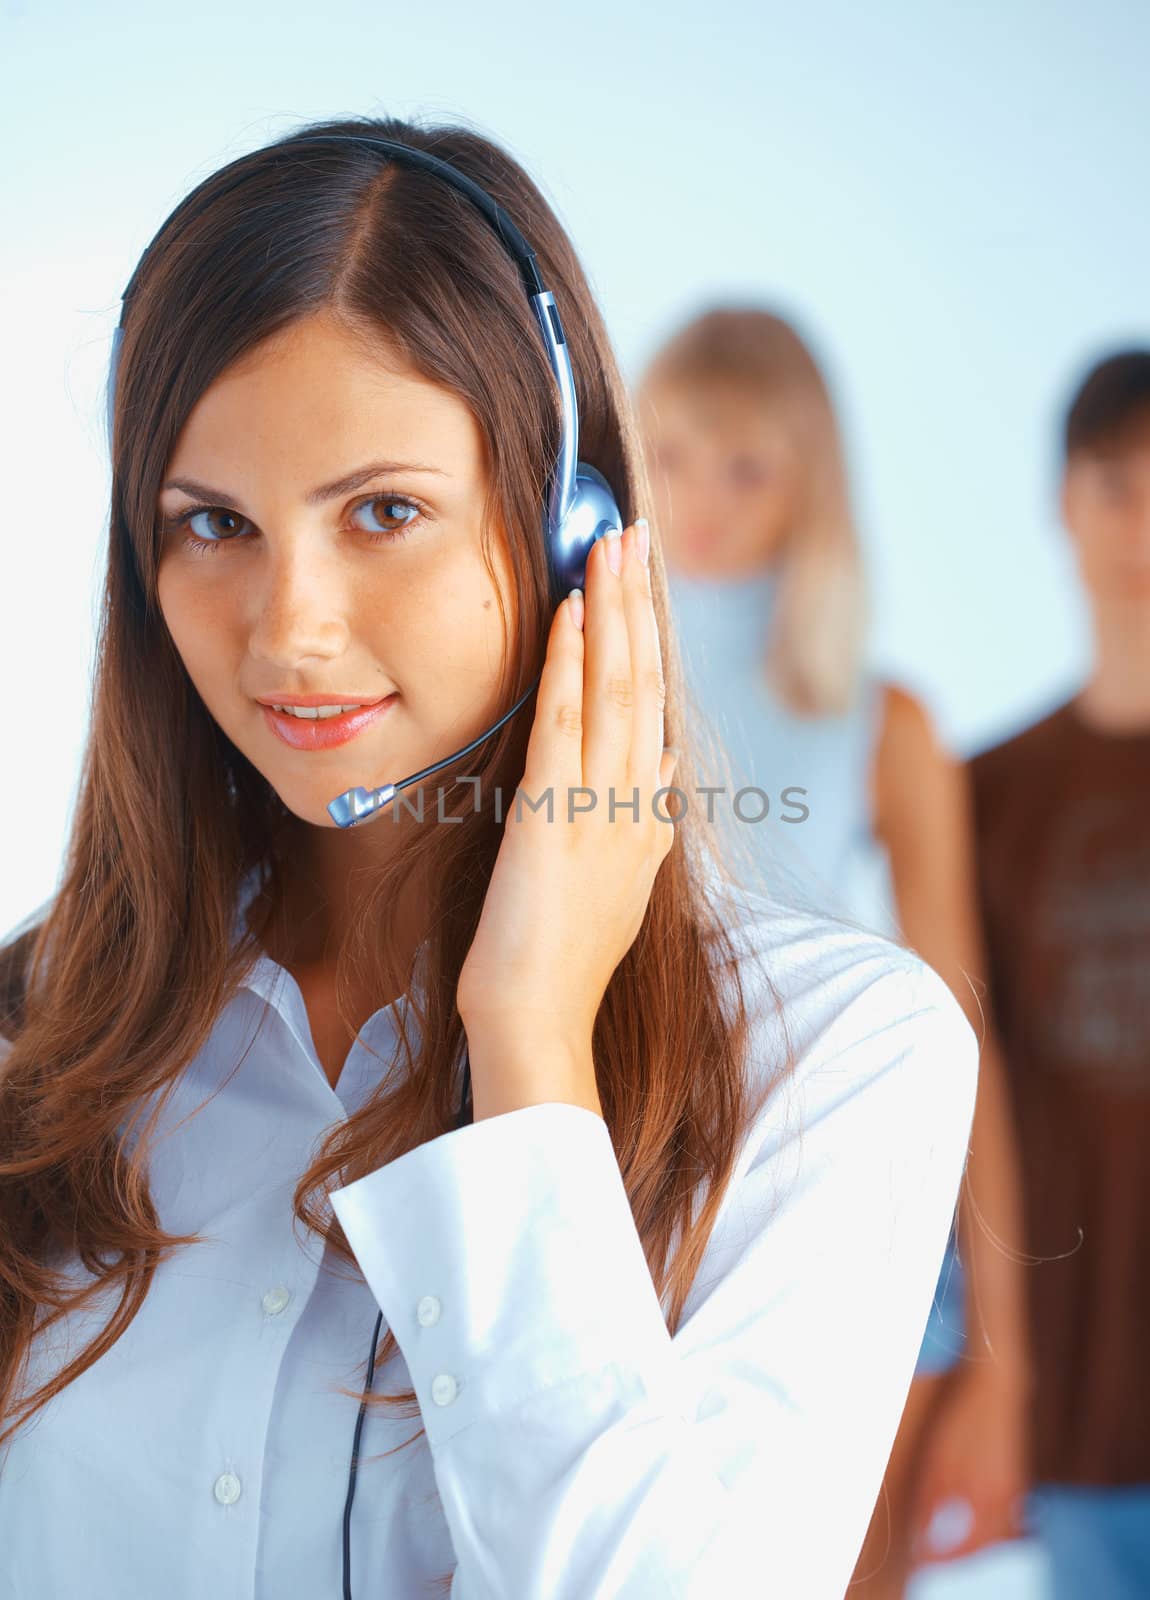 Young beautiful woman with headset with some people at the background
